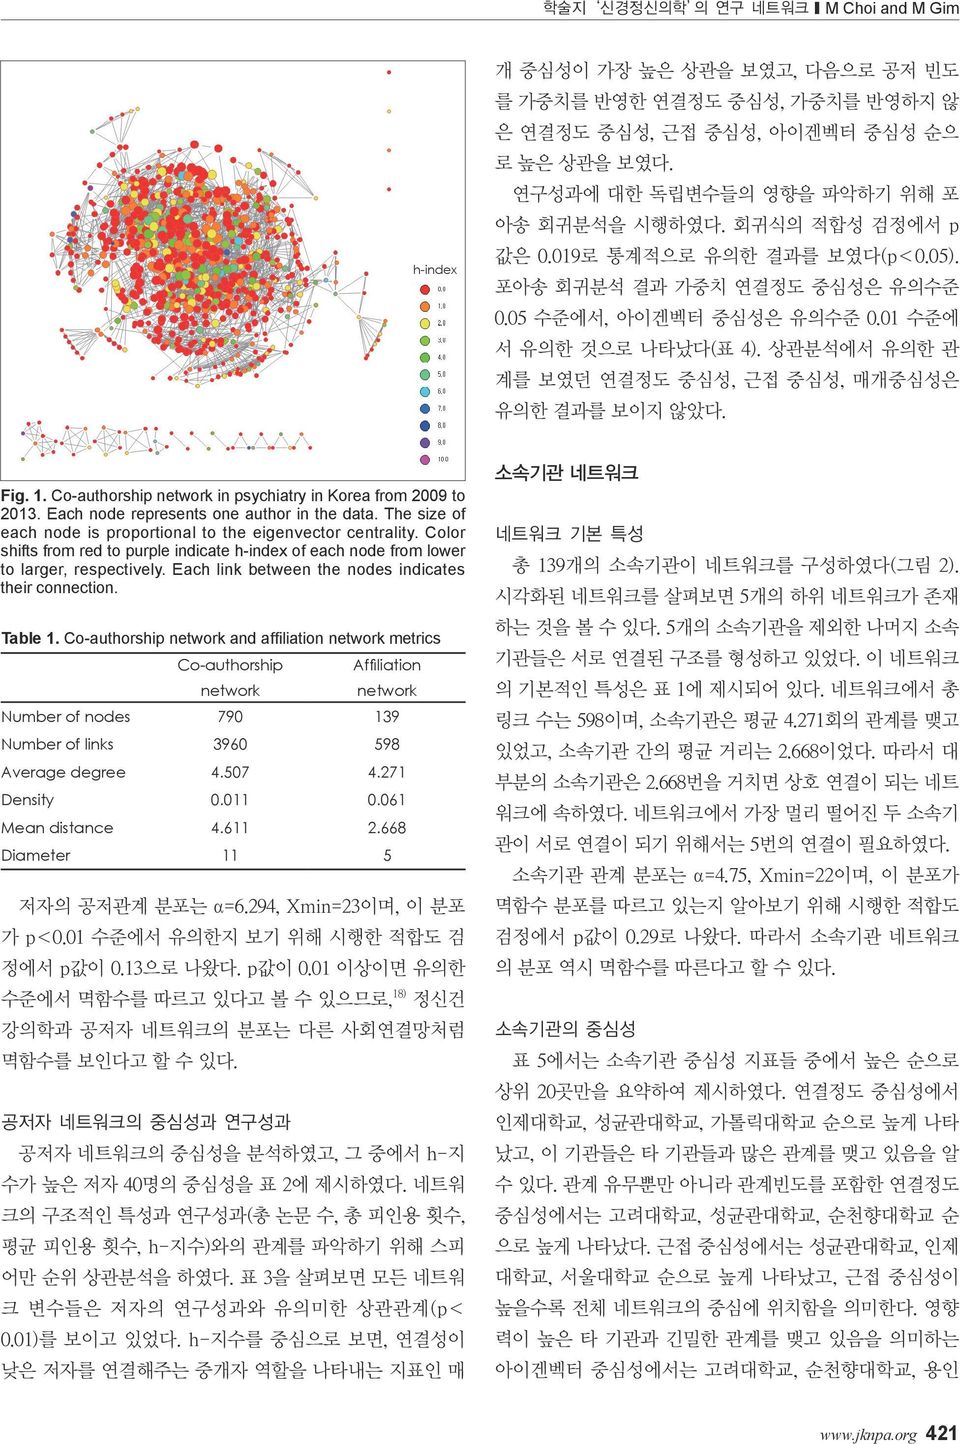 Co-authorship network in psychiatry in Korea from 2009 to 2013. Each node represents one author in the data. The size of each node is proportional to the eigenvector centrality.